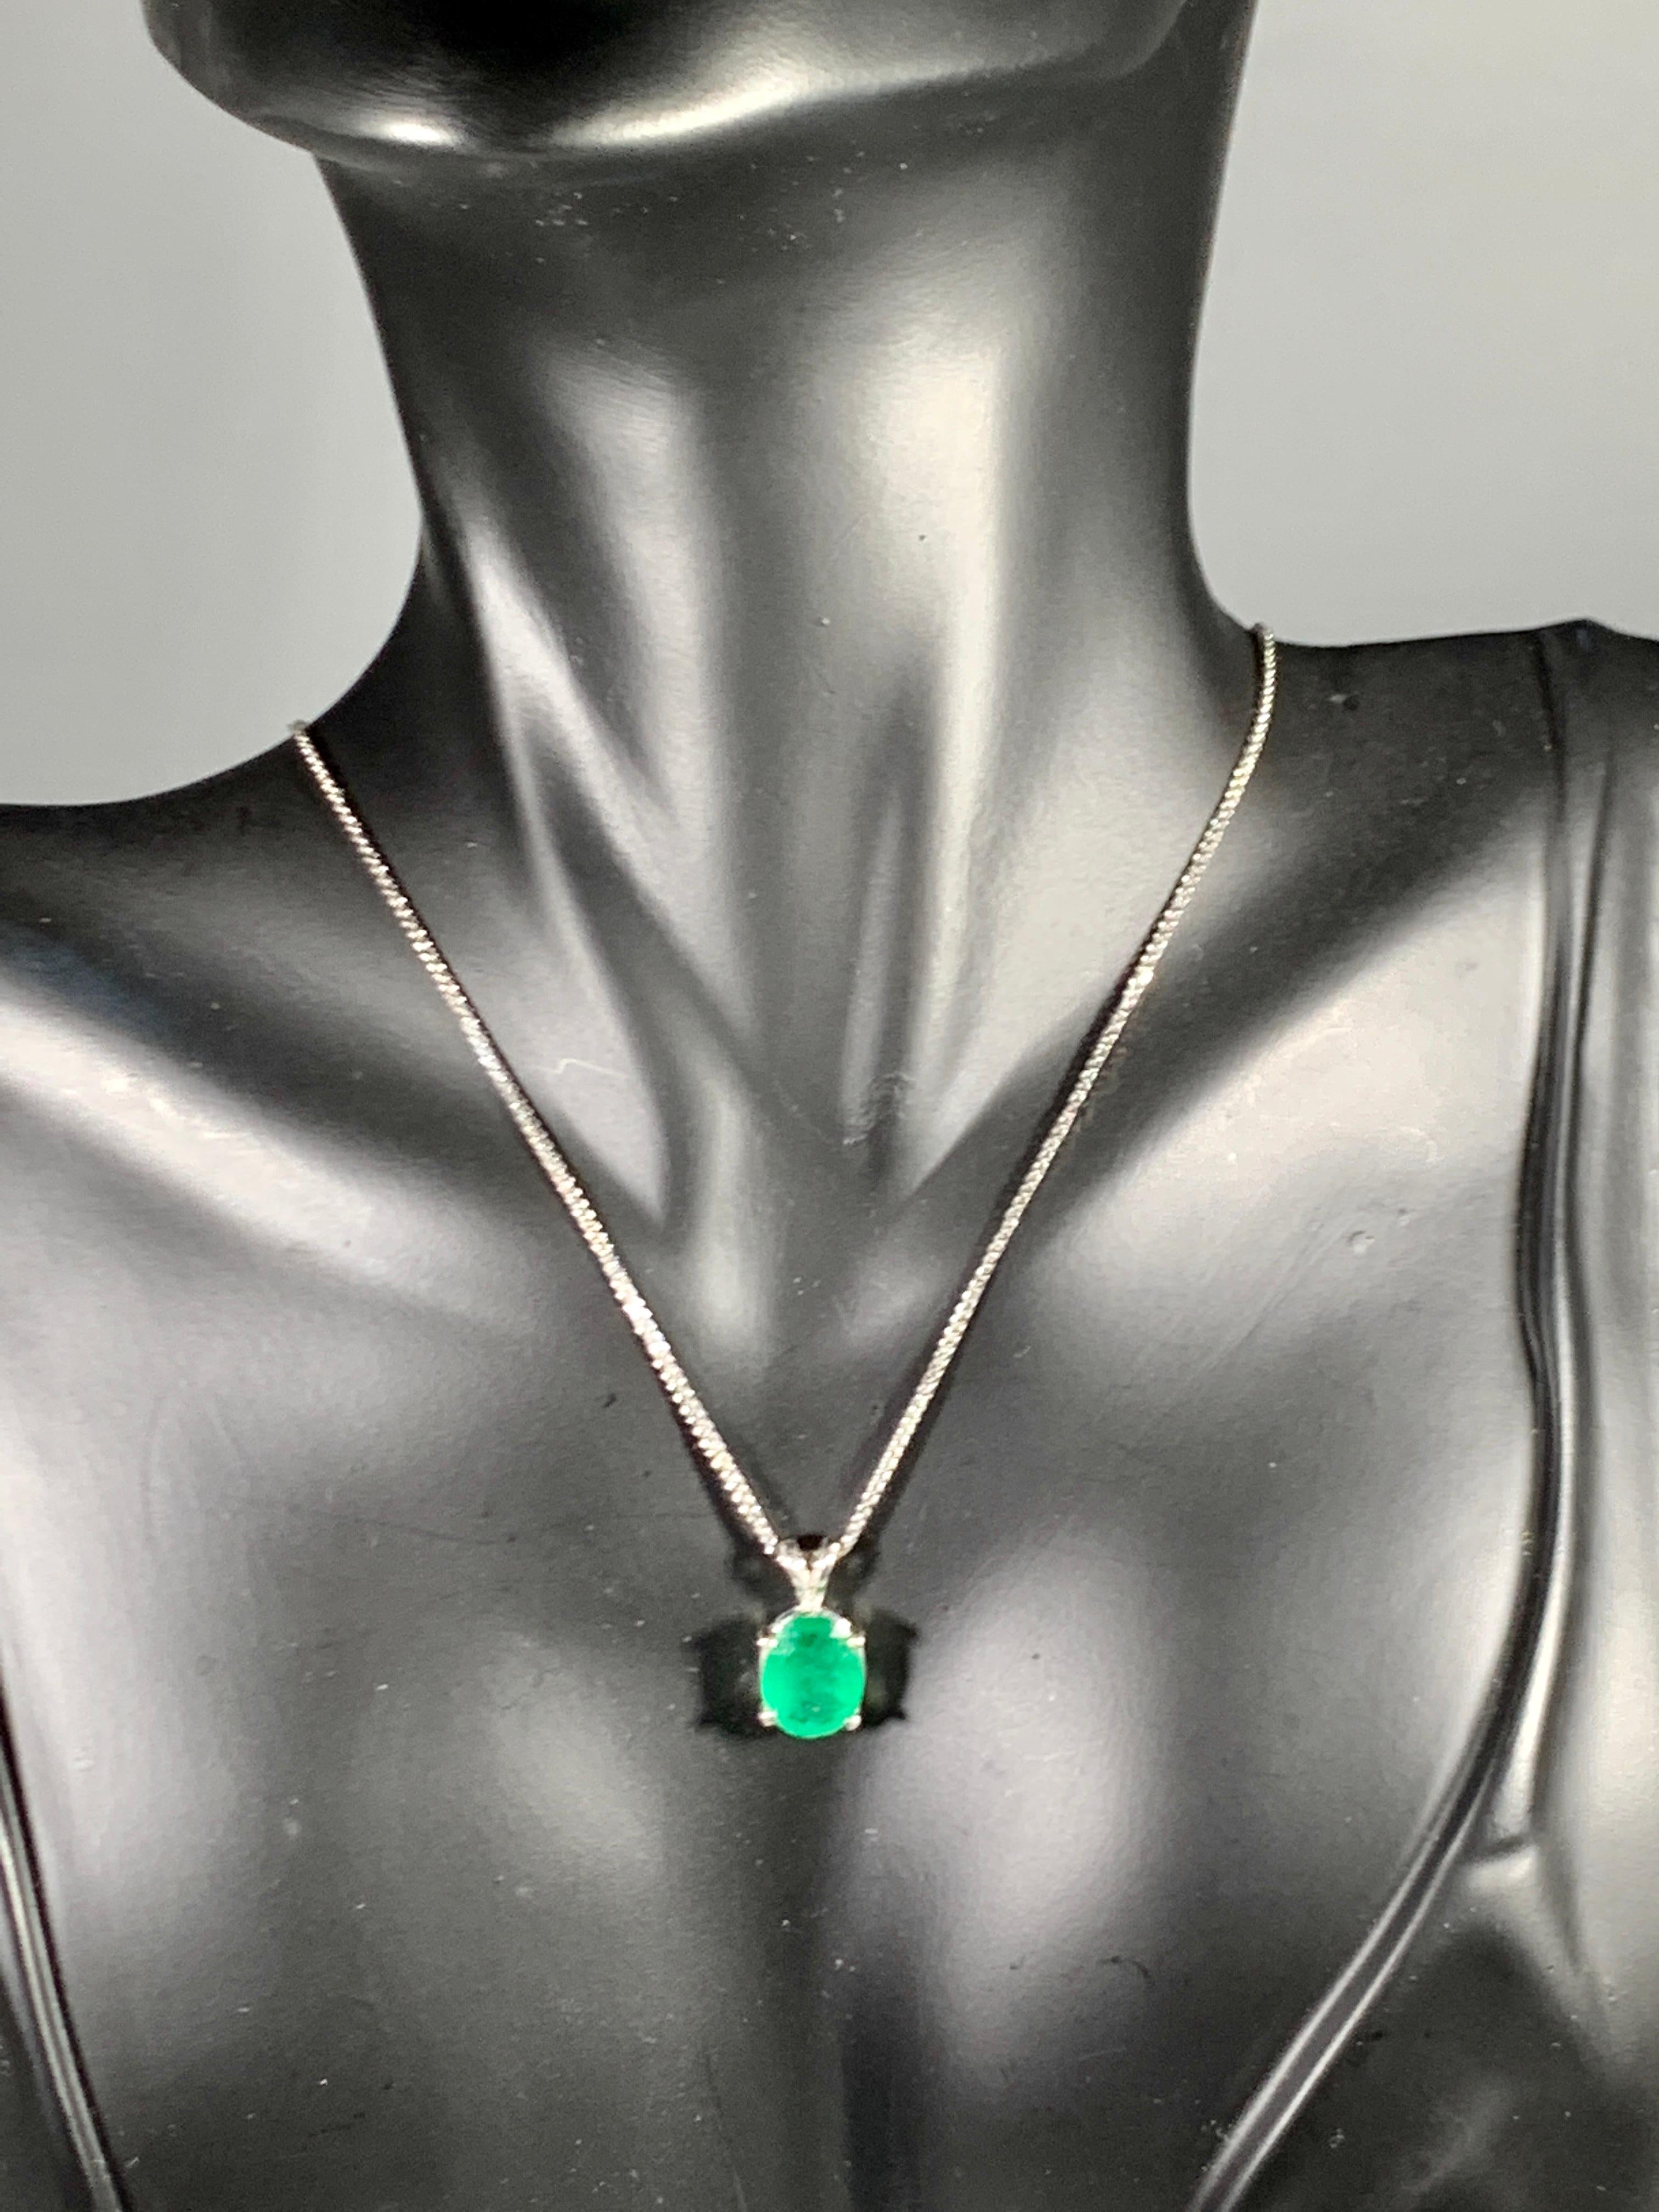 2.5 Carat Oval Shape Emerald Pendant or Necklace 14 Karat White Gold with Chain 3